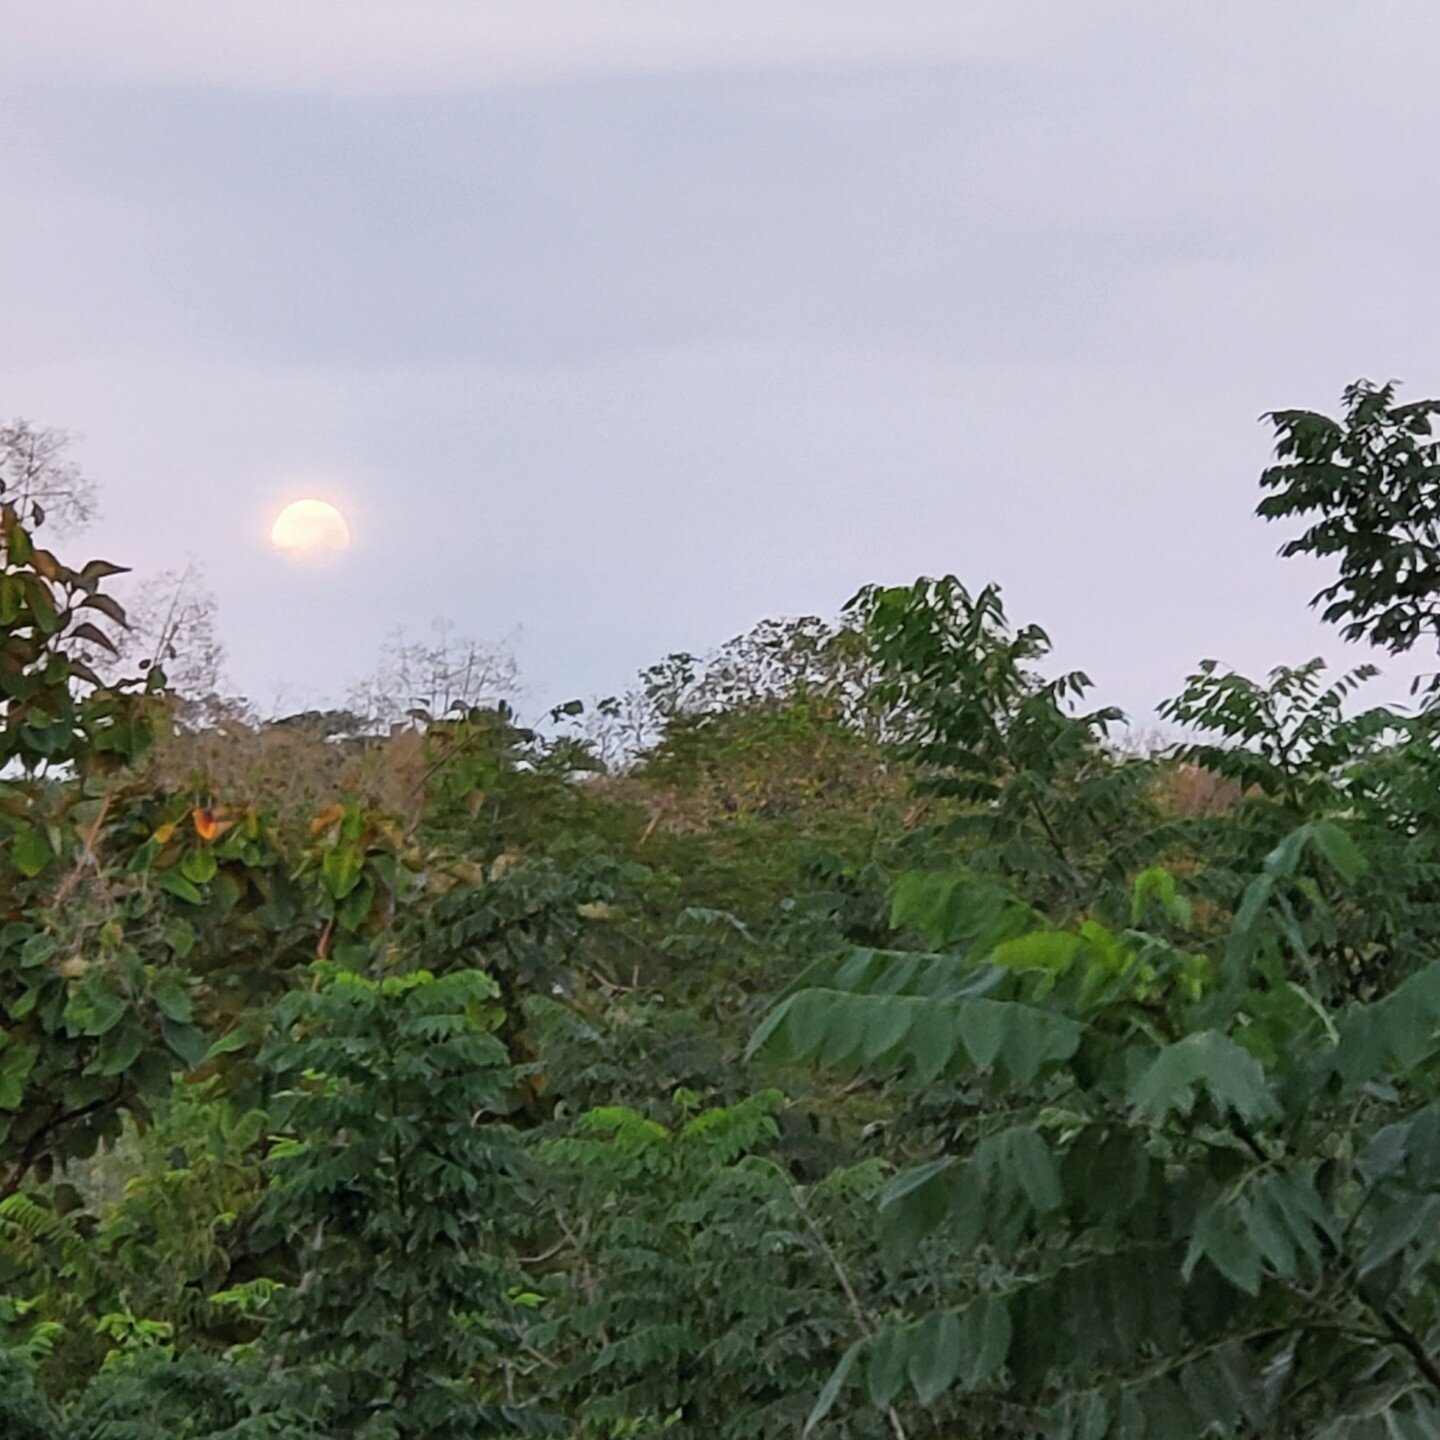 #moonrise above #montezumacostarica 

This is the tree line @casitaom

Lush jungle all around.

It's a dream to wake up here to the sound of the jungle coming alive. 

We have several fully-furnished apartments for short to medium-length stays. We ho